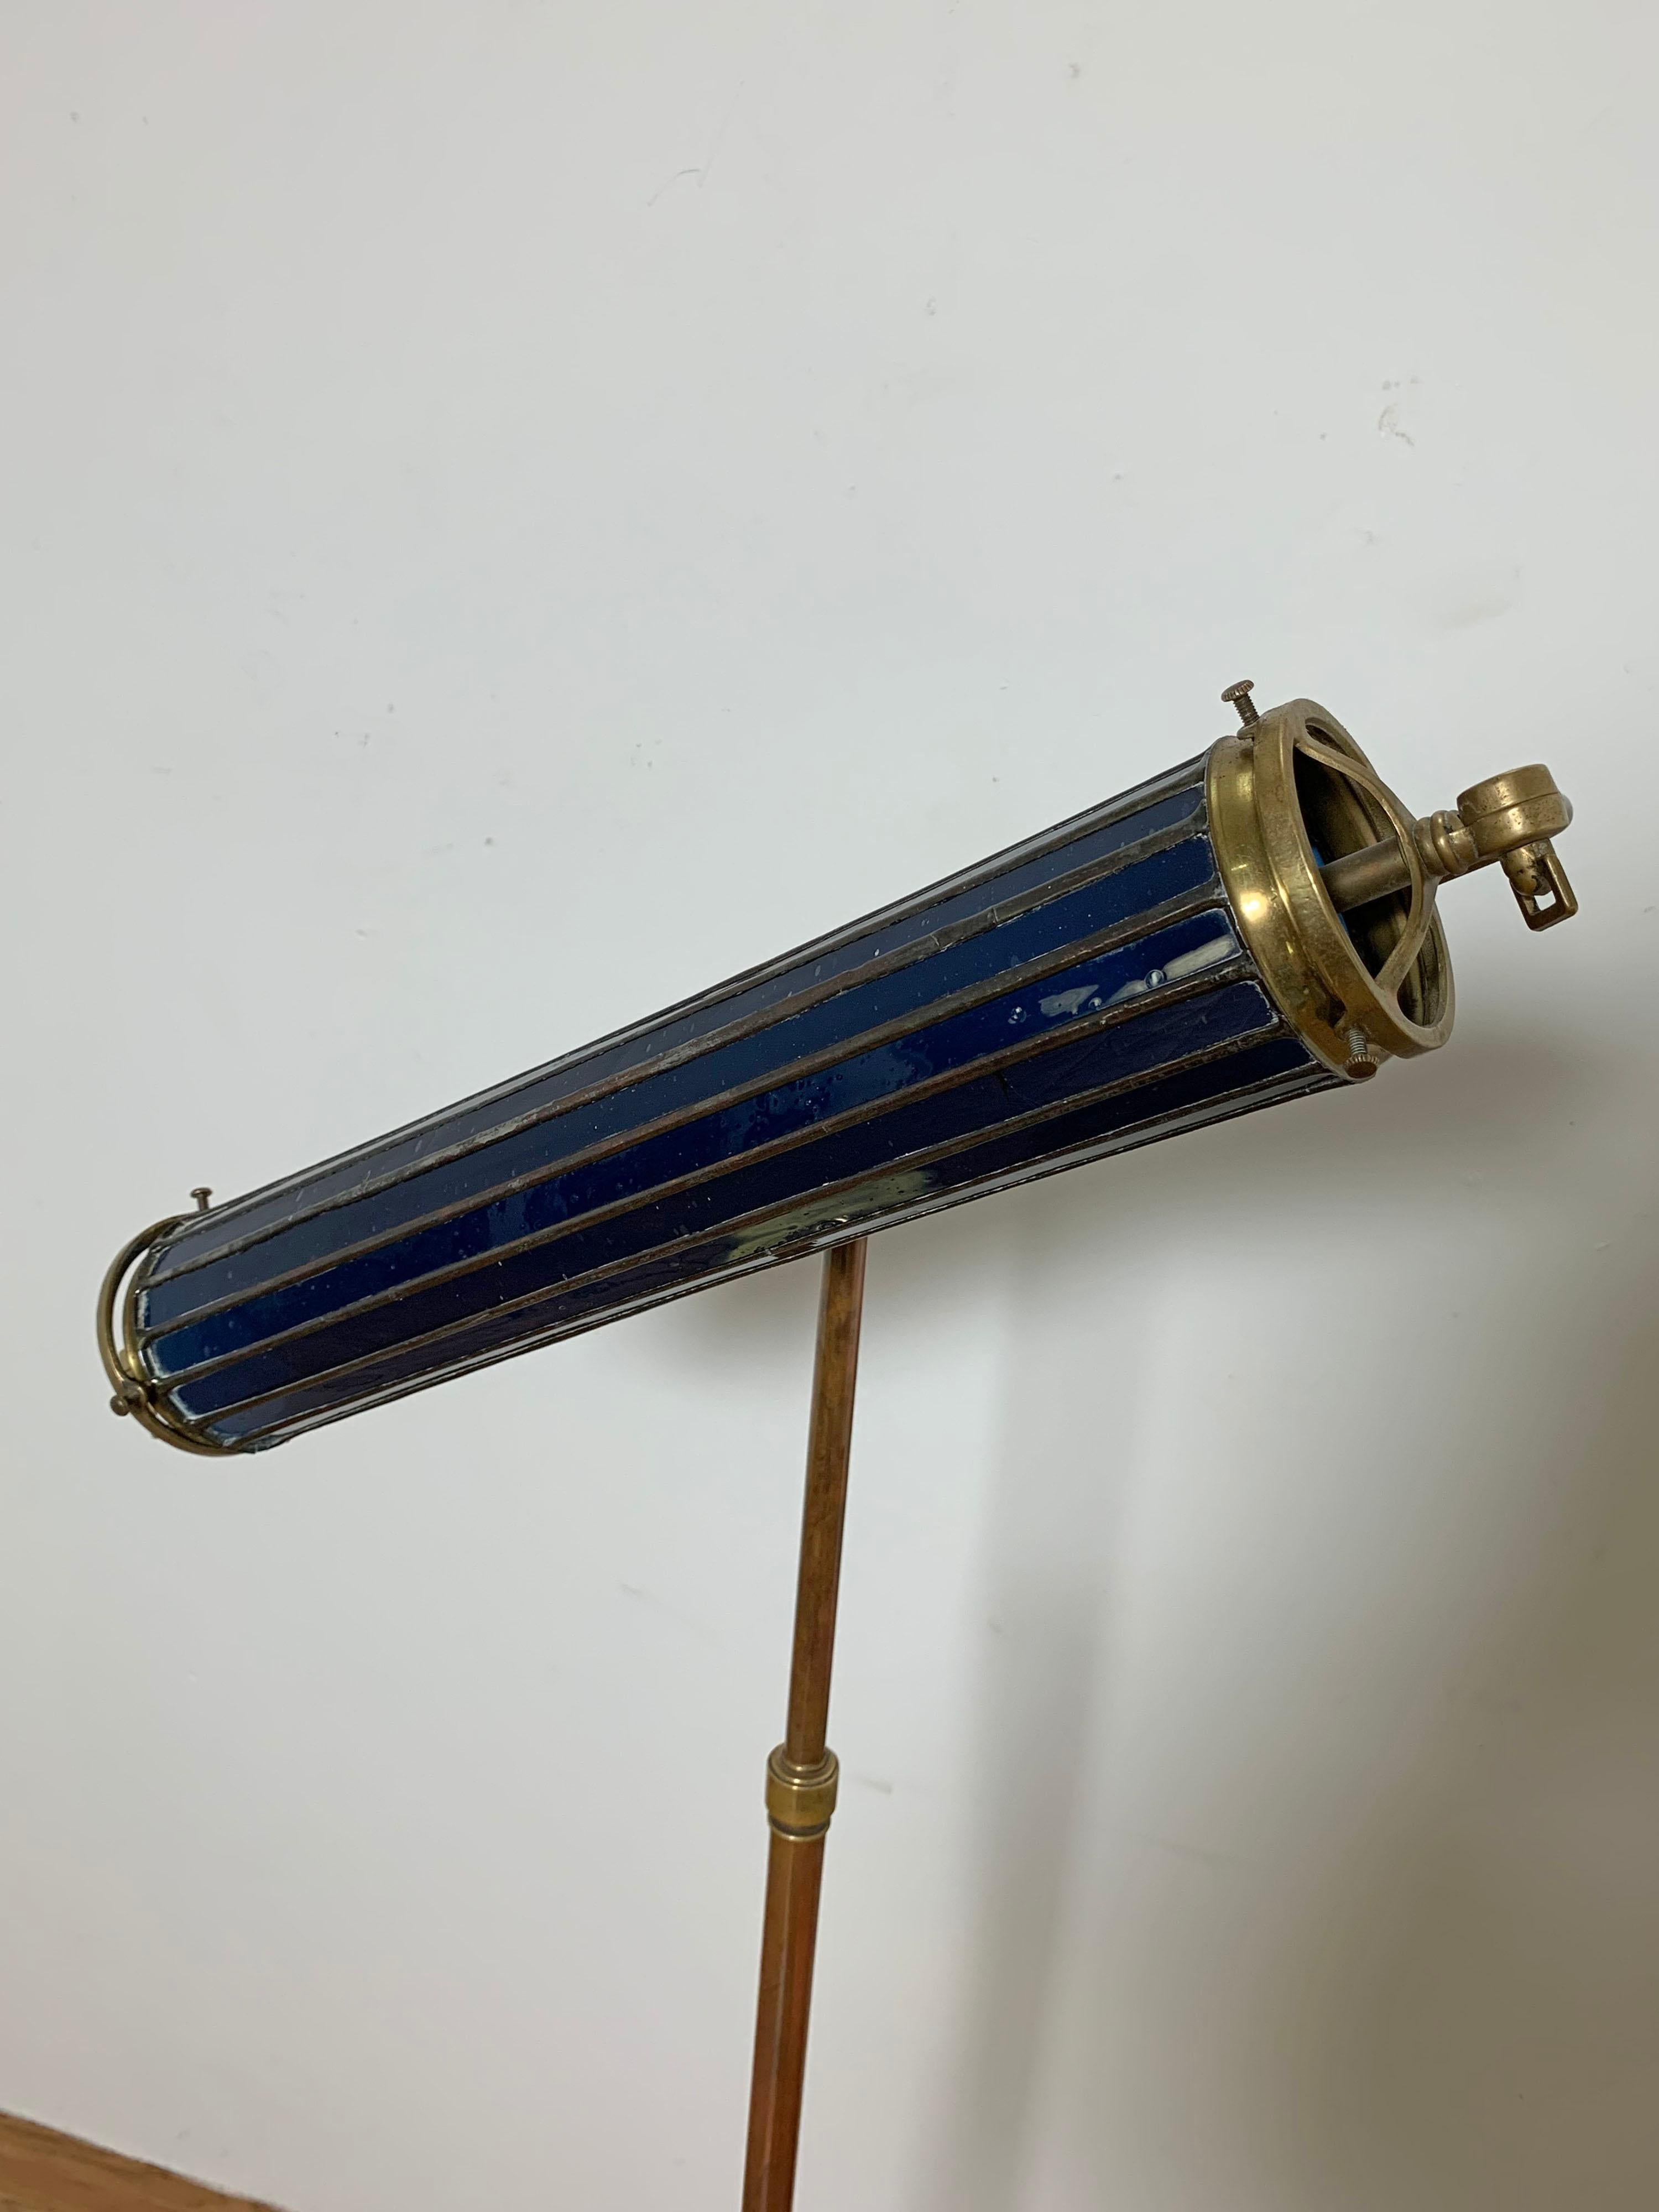 An unusual one of a kind lamp, circa 1920s with polished brass base and sophisticated mounting hardware for a leaded cobalt glass cylinder shade. The high quality craftsmanship indicates this was likely a custom made piece, made to the